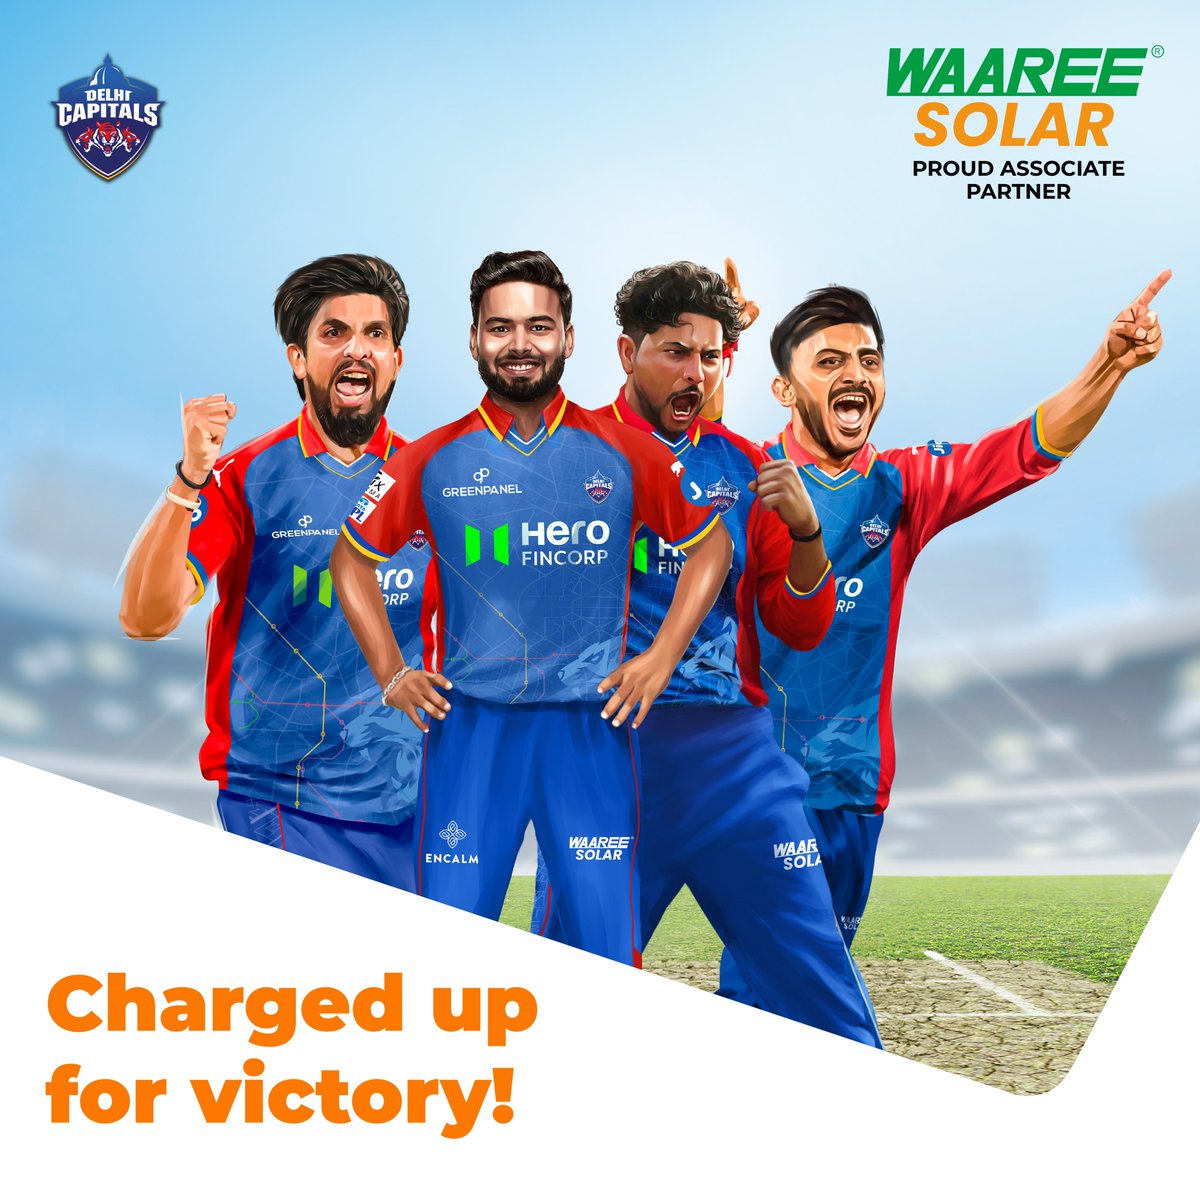 The stage is set, the lights are bright, and the energy is electrifying! We at Waaree Solar are sending our strongest wishes to the @delhicapitals team as they step onto the field today.
#WaareeSolar #DelhiCapitals #IPL2024 #PoweringPerformance